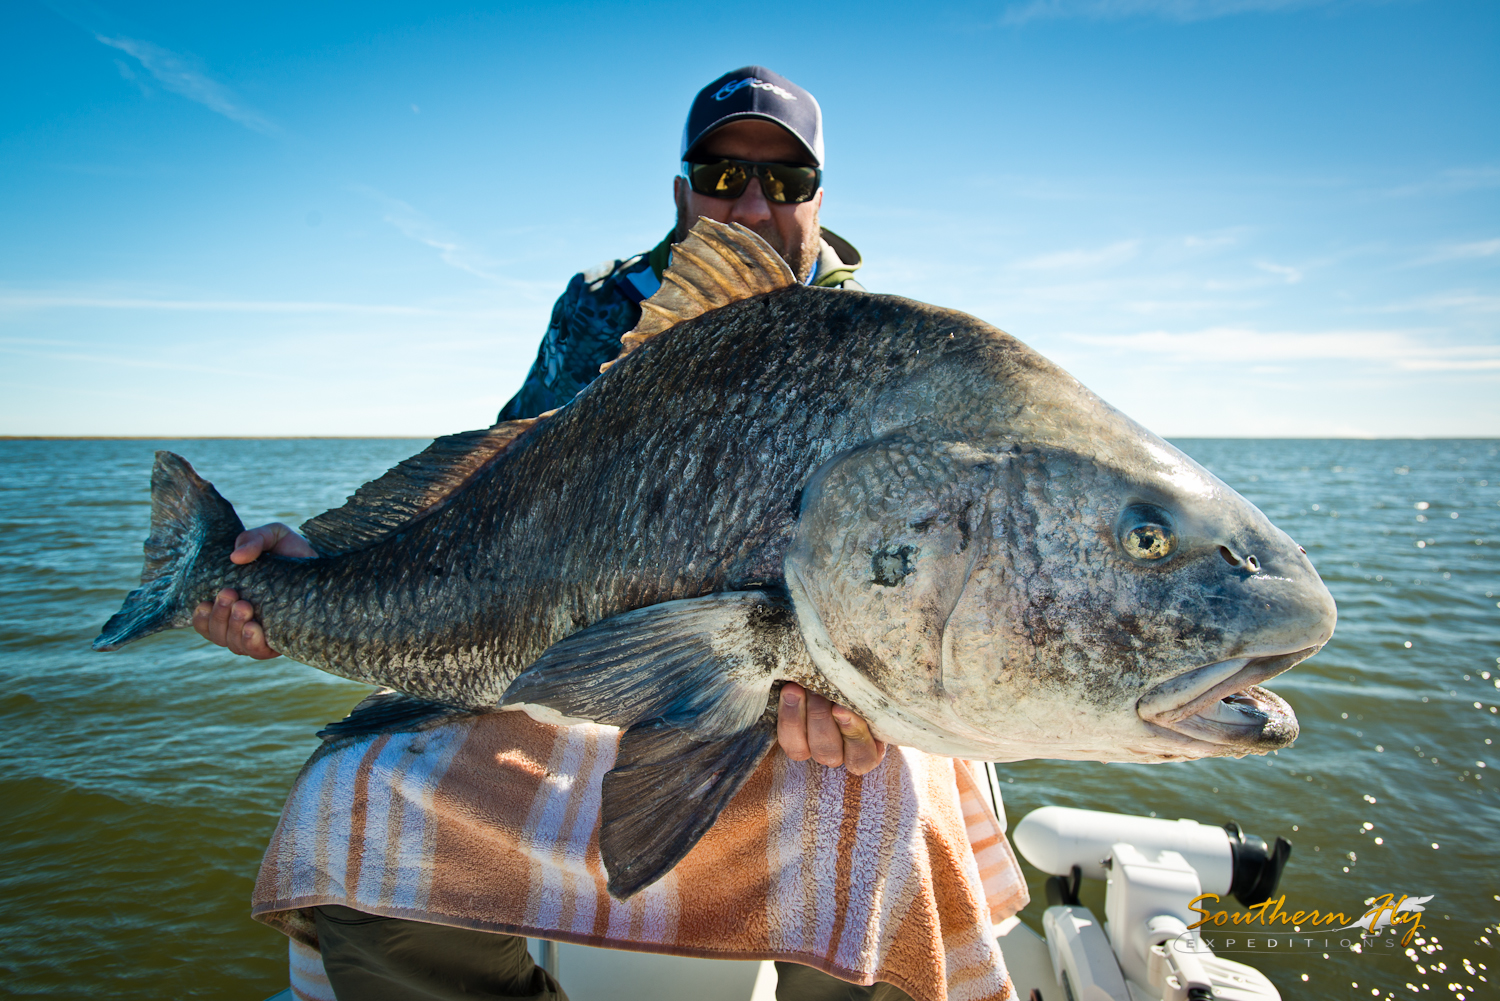 Minnesota Anglers Fly Fishing New Orleans Southern Fly Expeditions